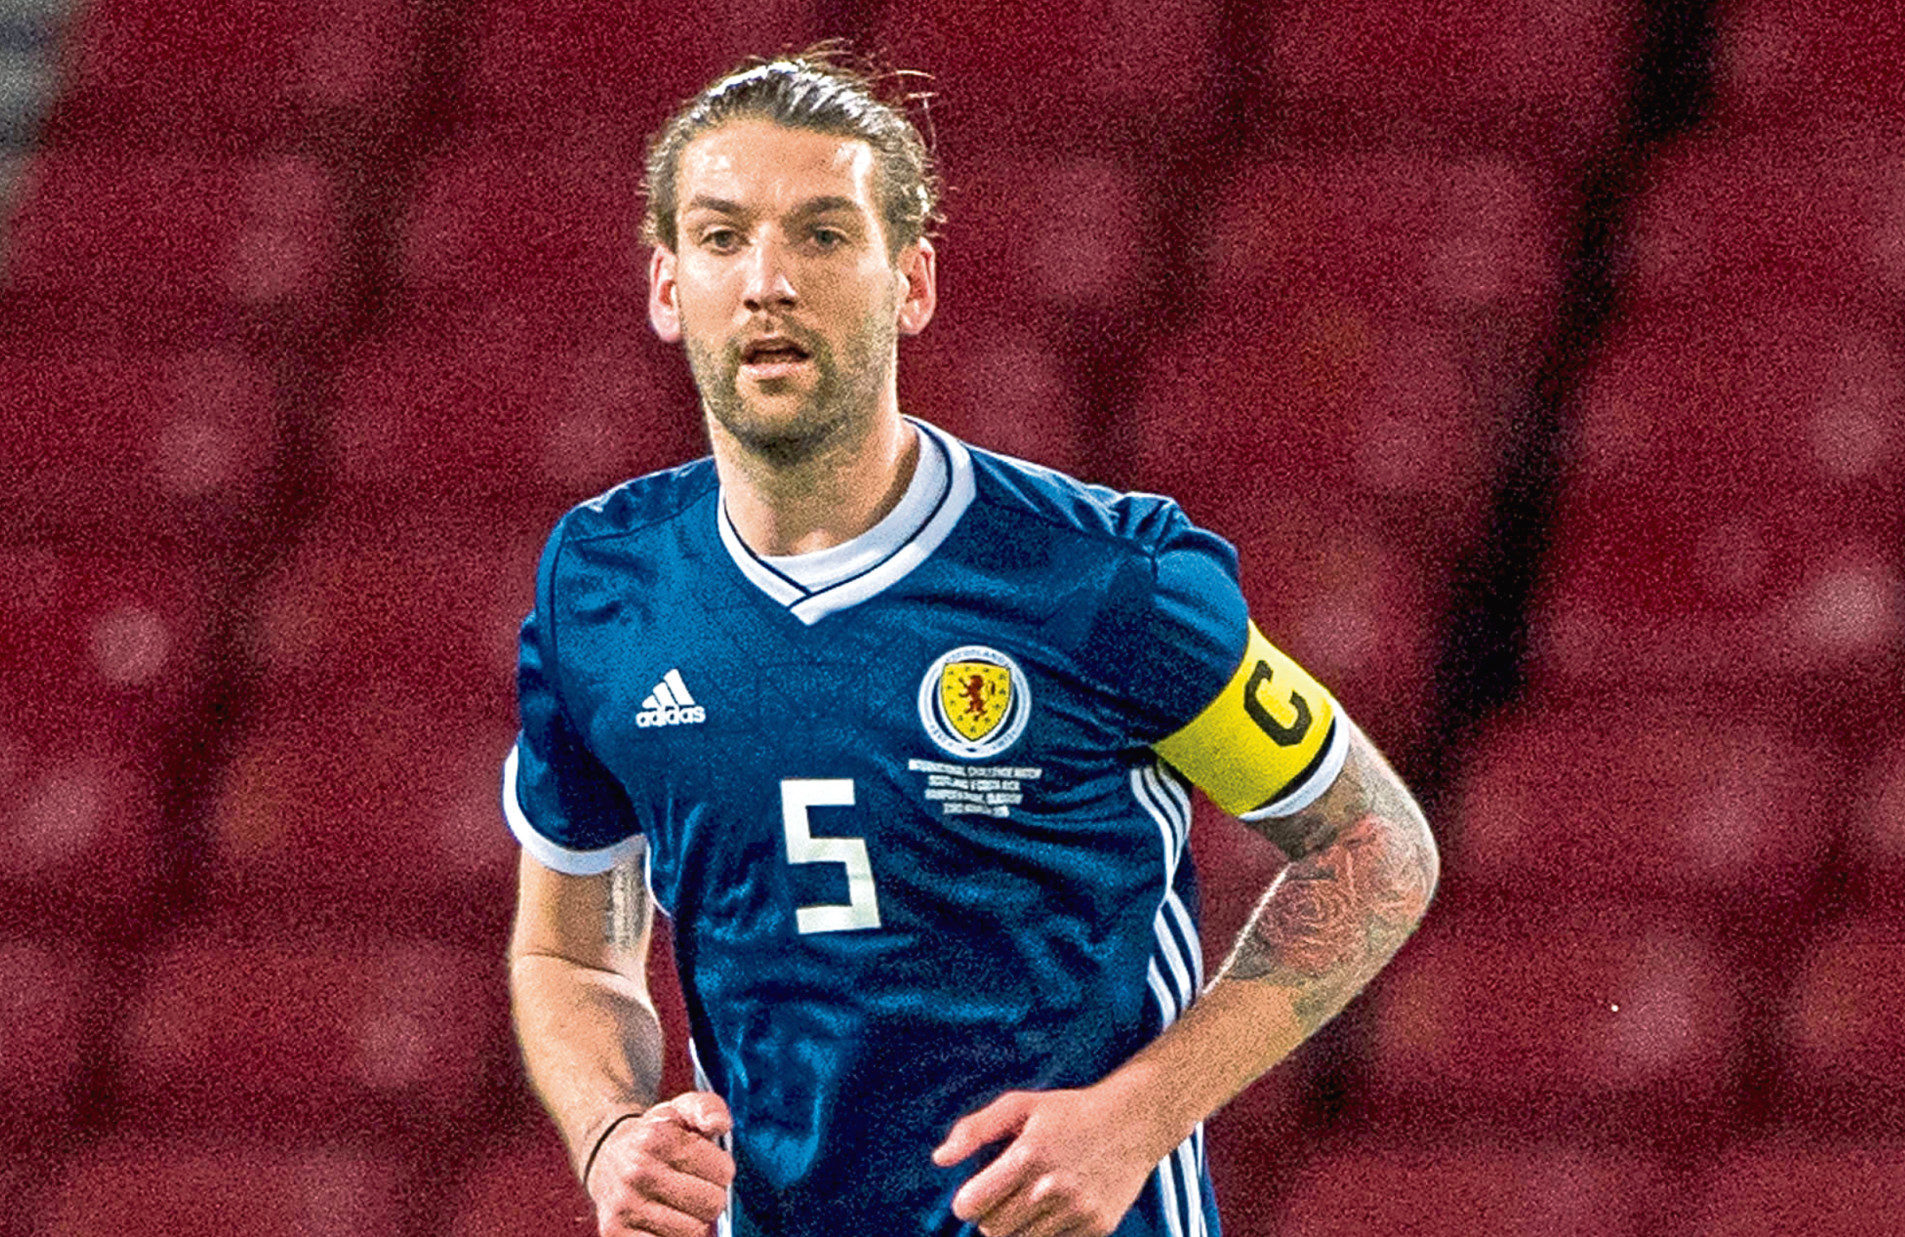 Charlie Mulgrew in action for Scotland.